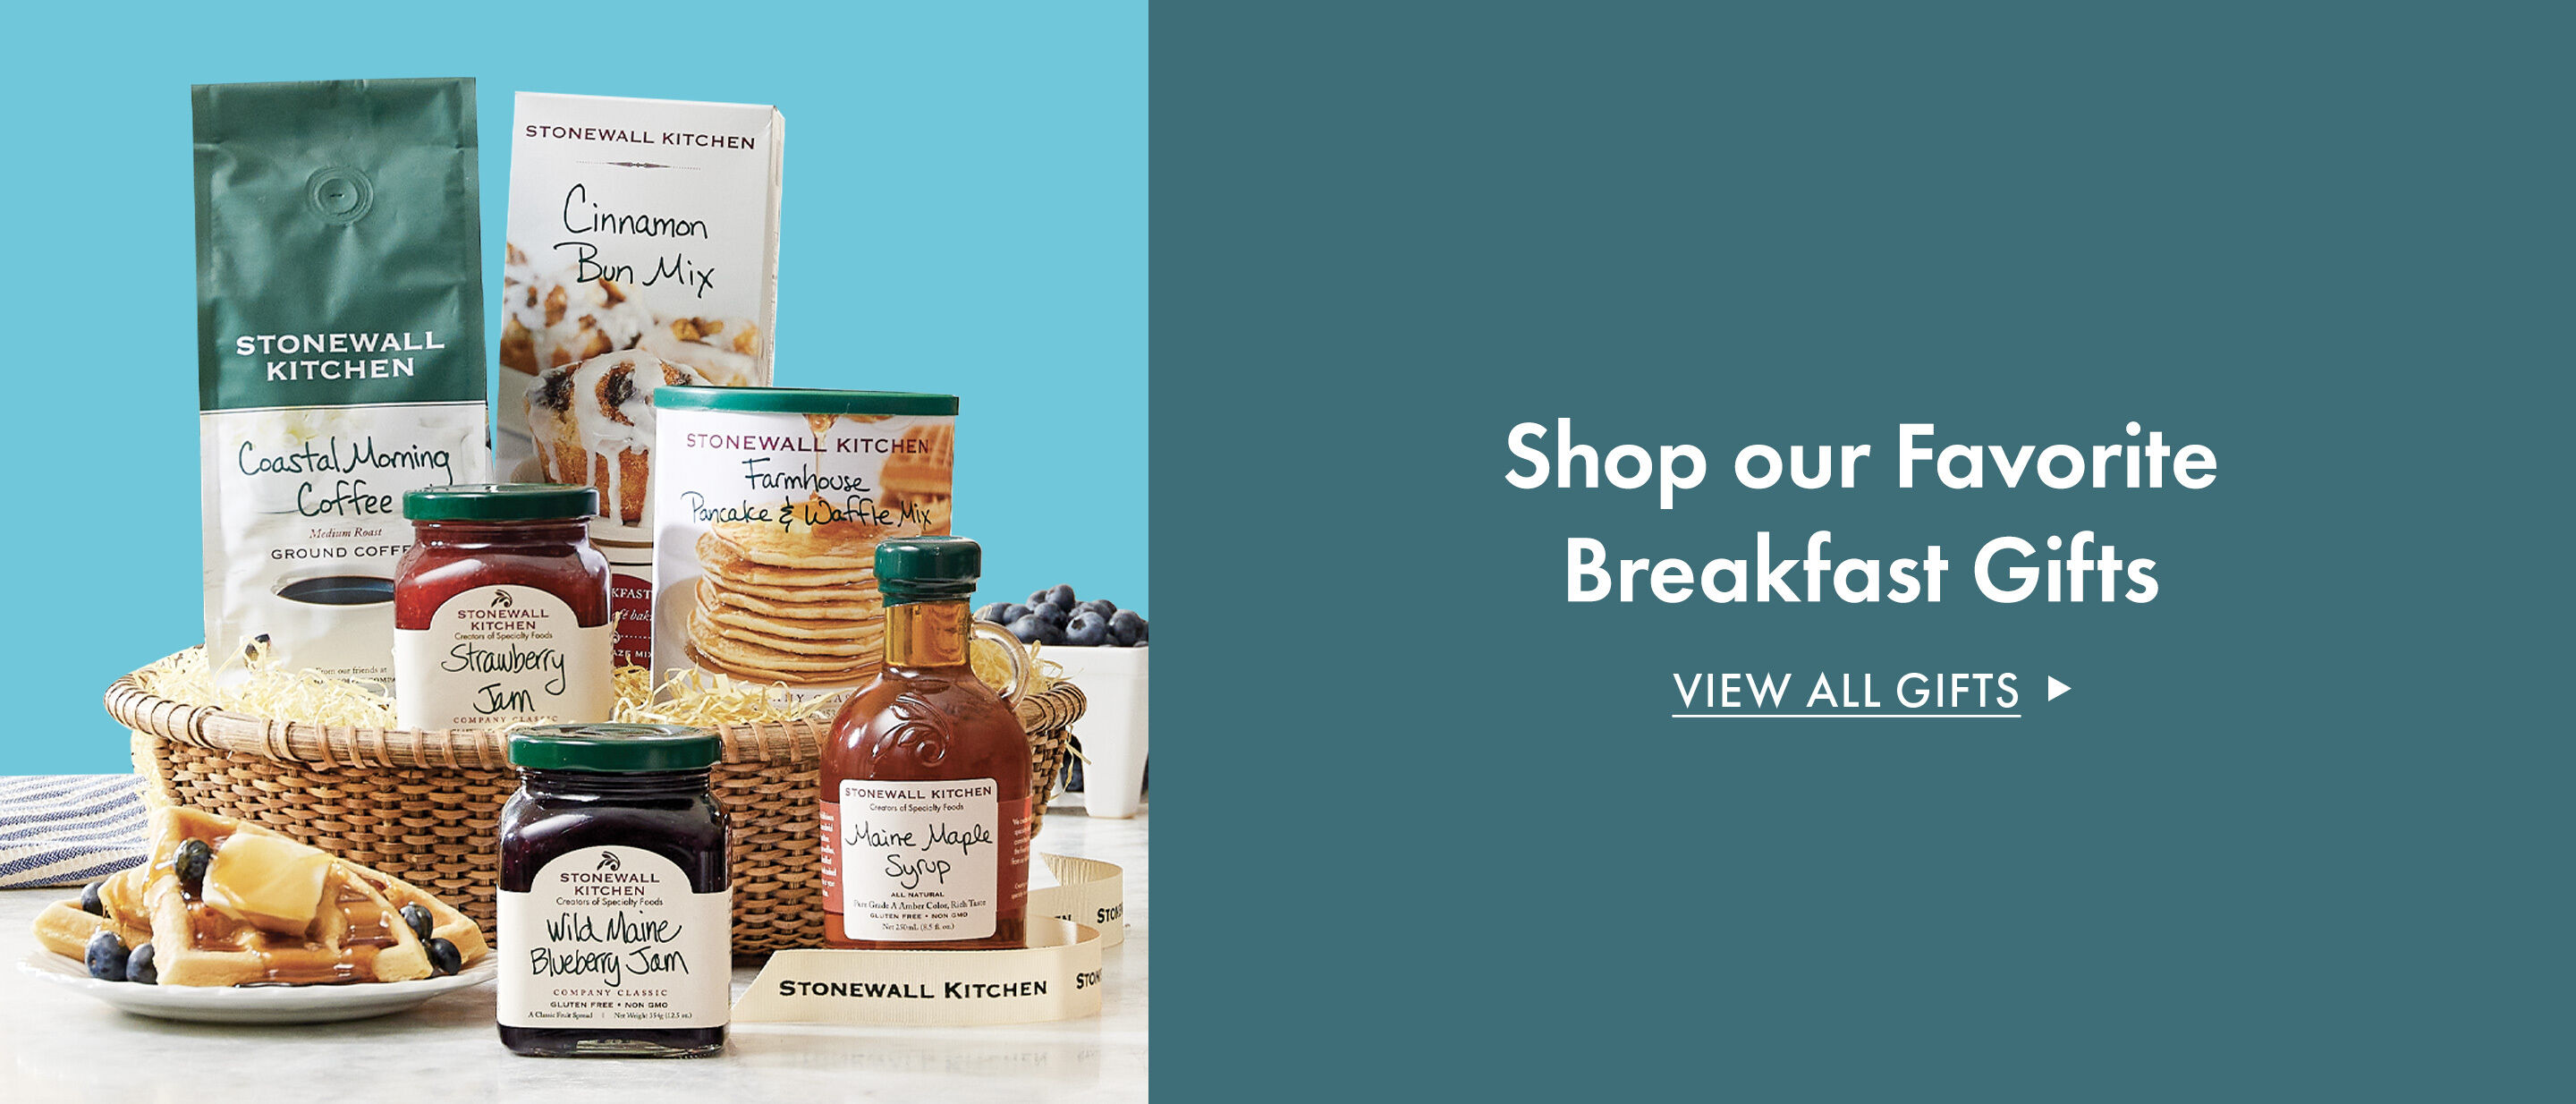 Shop Our Favorite Breakfast Gifts | View All Gifts